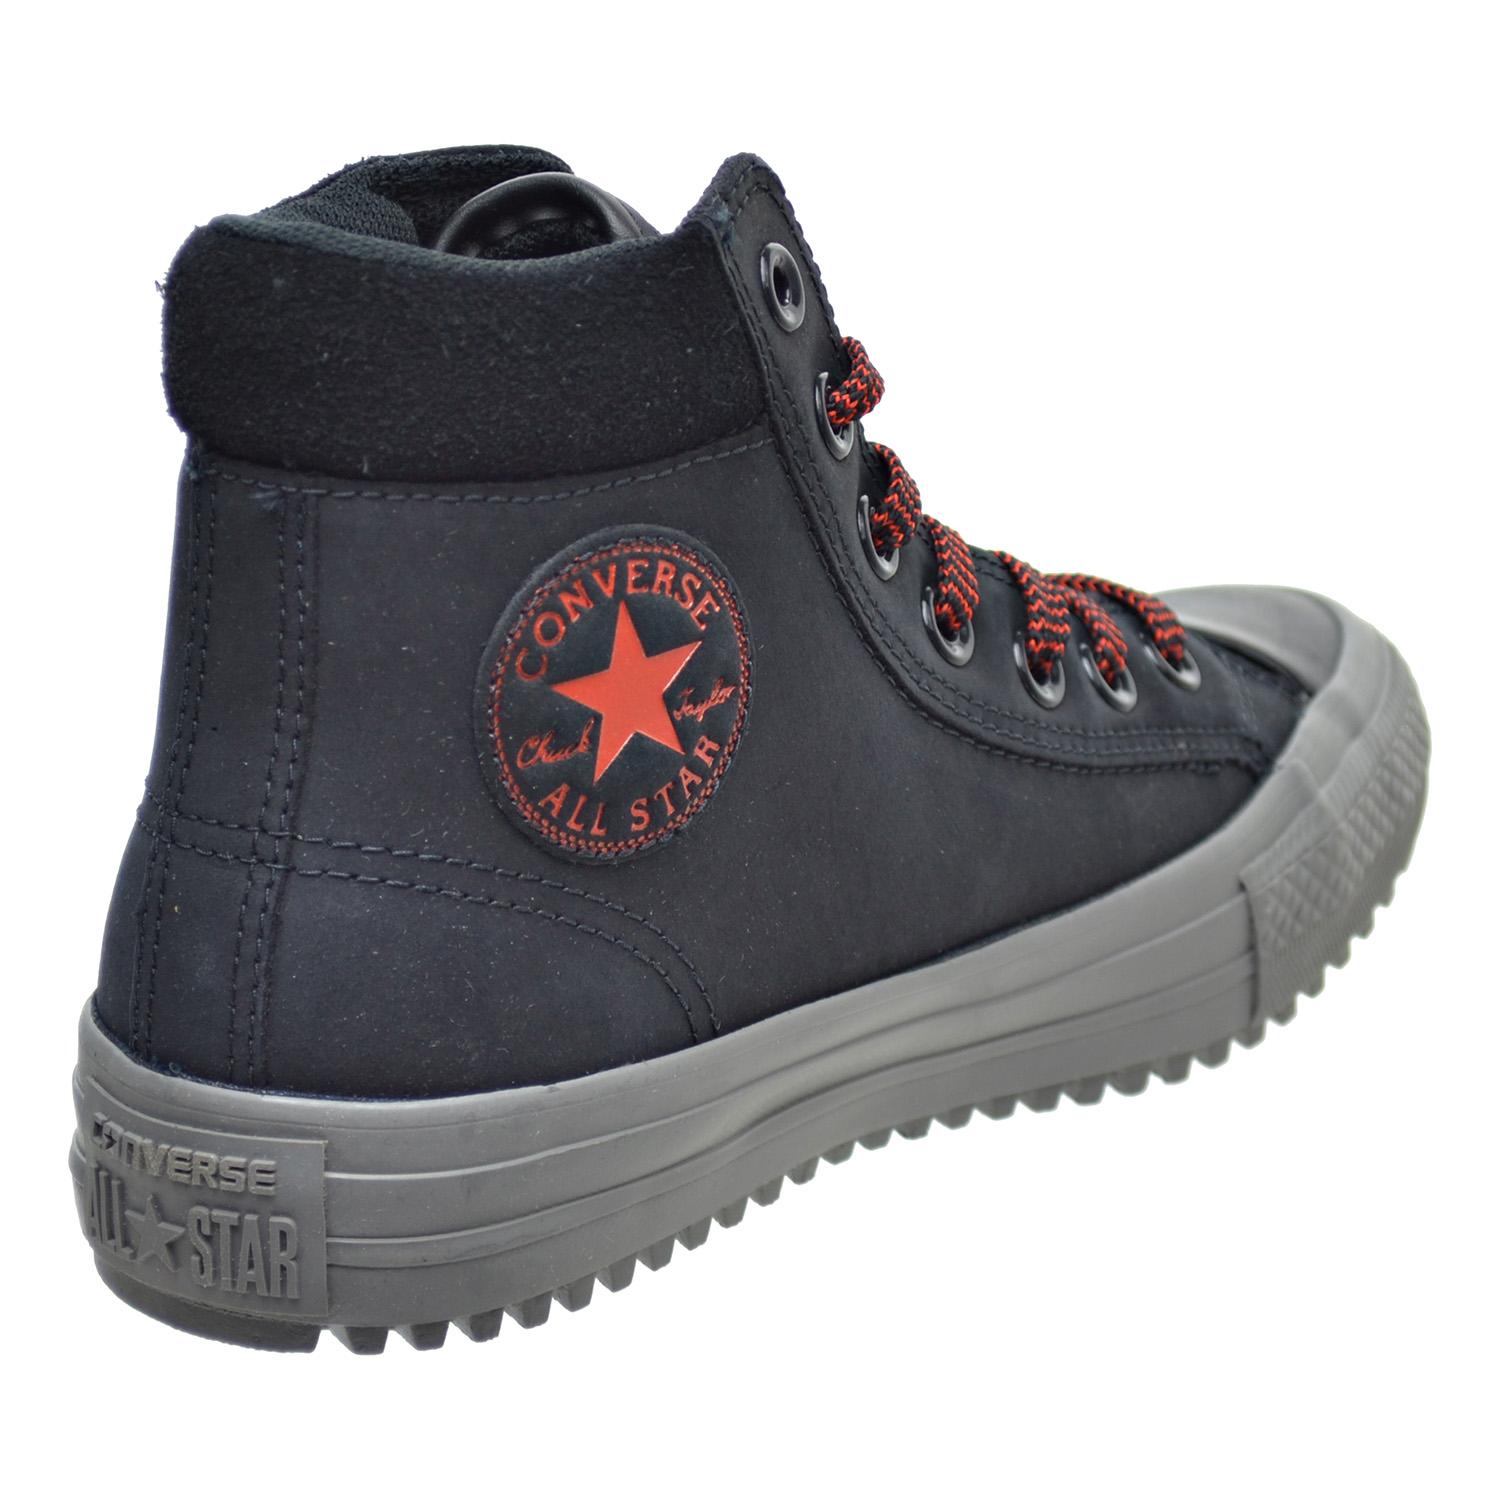 Converse Chuck Taylor All Star PC High Top Unisex Boots Black/Charcoal Grey/Signal Red 153672c - image 3 of 6